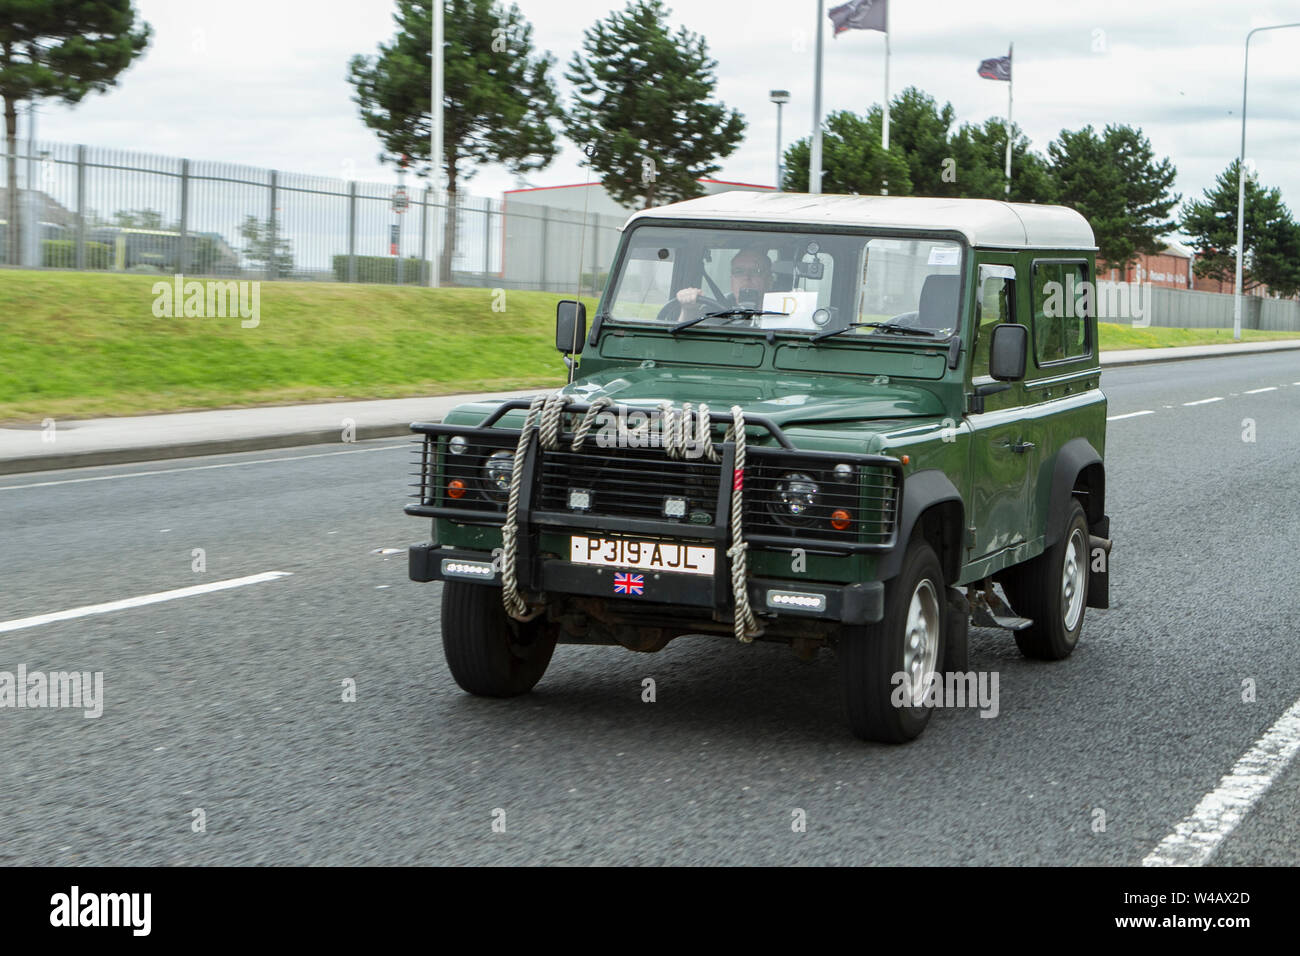 Fleetwood Festival of Transport – Tram Sunday 2019 P319 AJL land rover vintage vehicles and cars attend the classic car show in Lancashire, UK Stock Photo